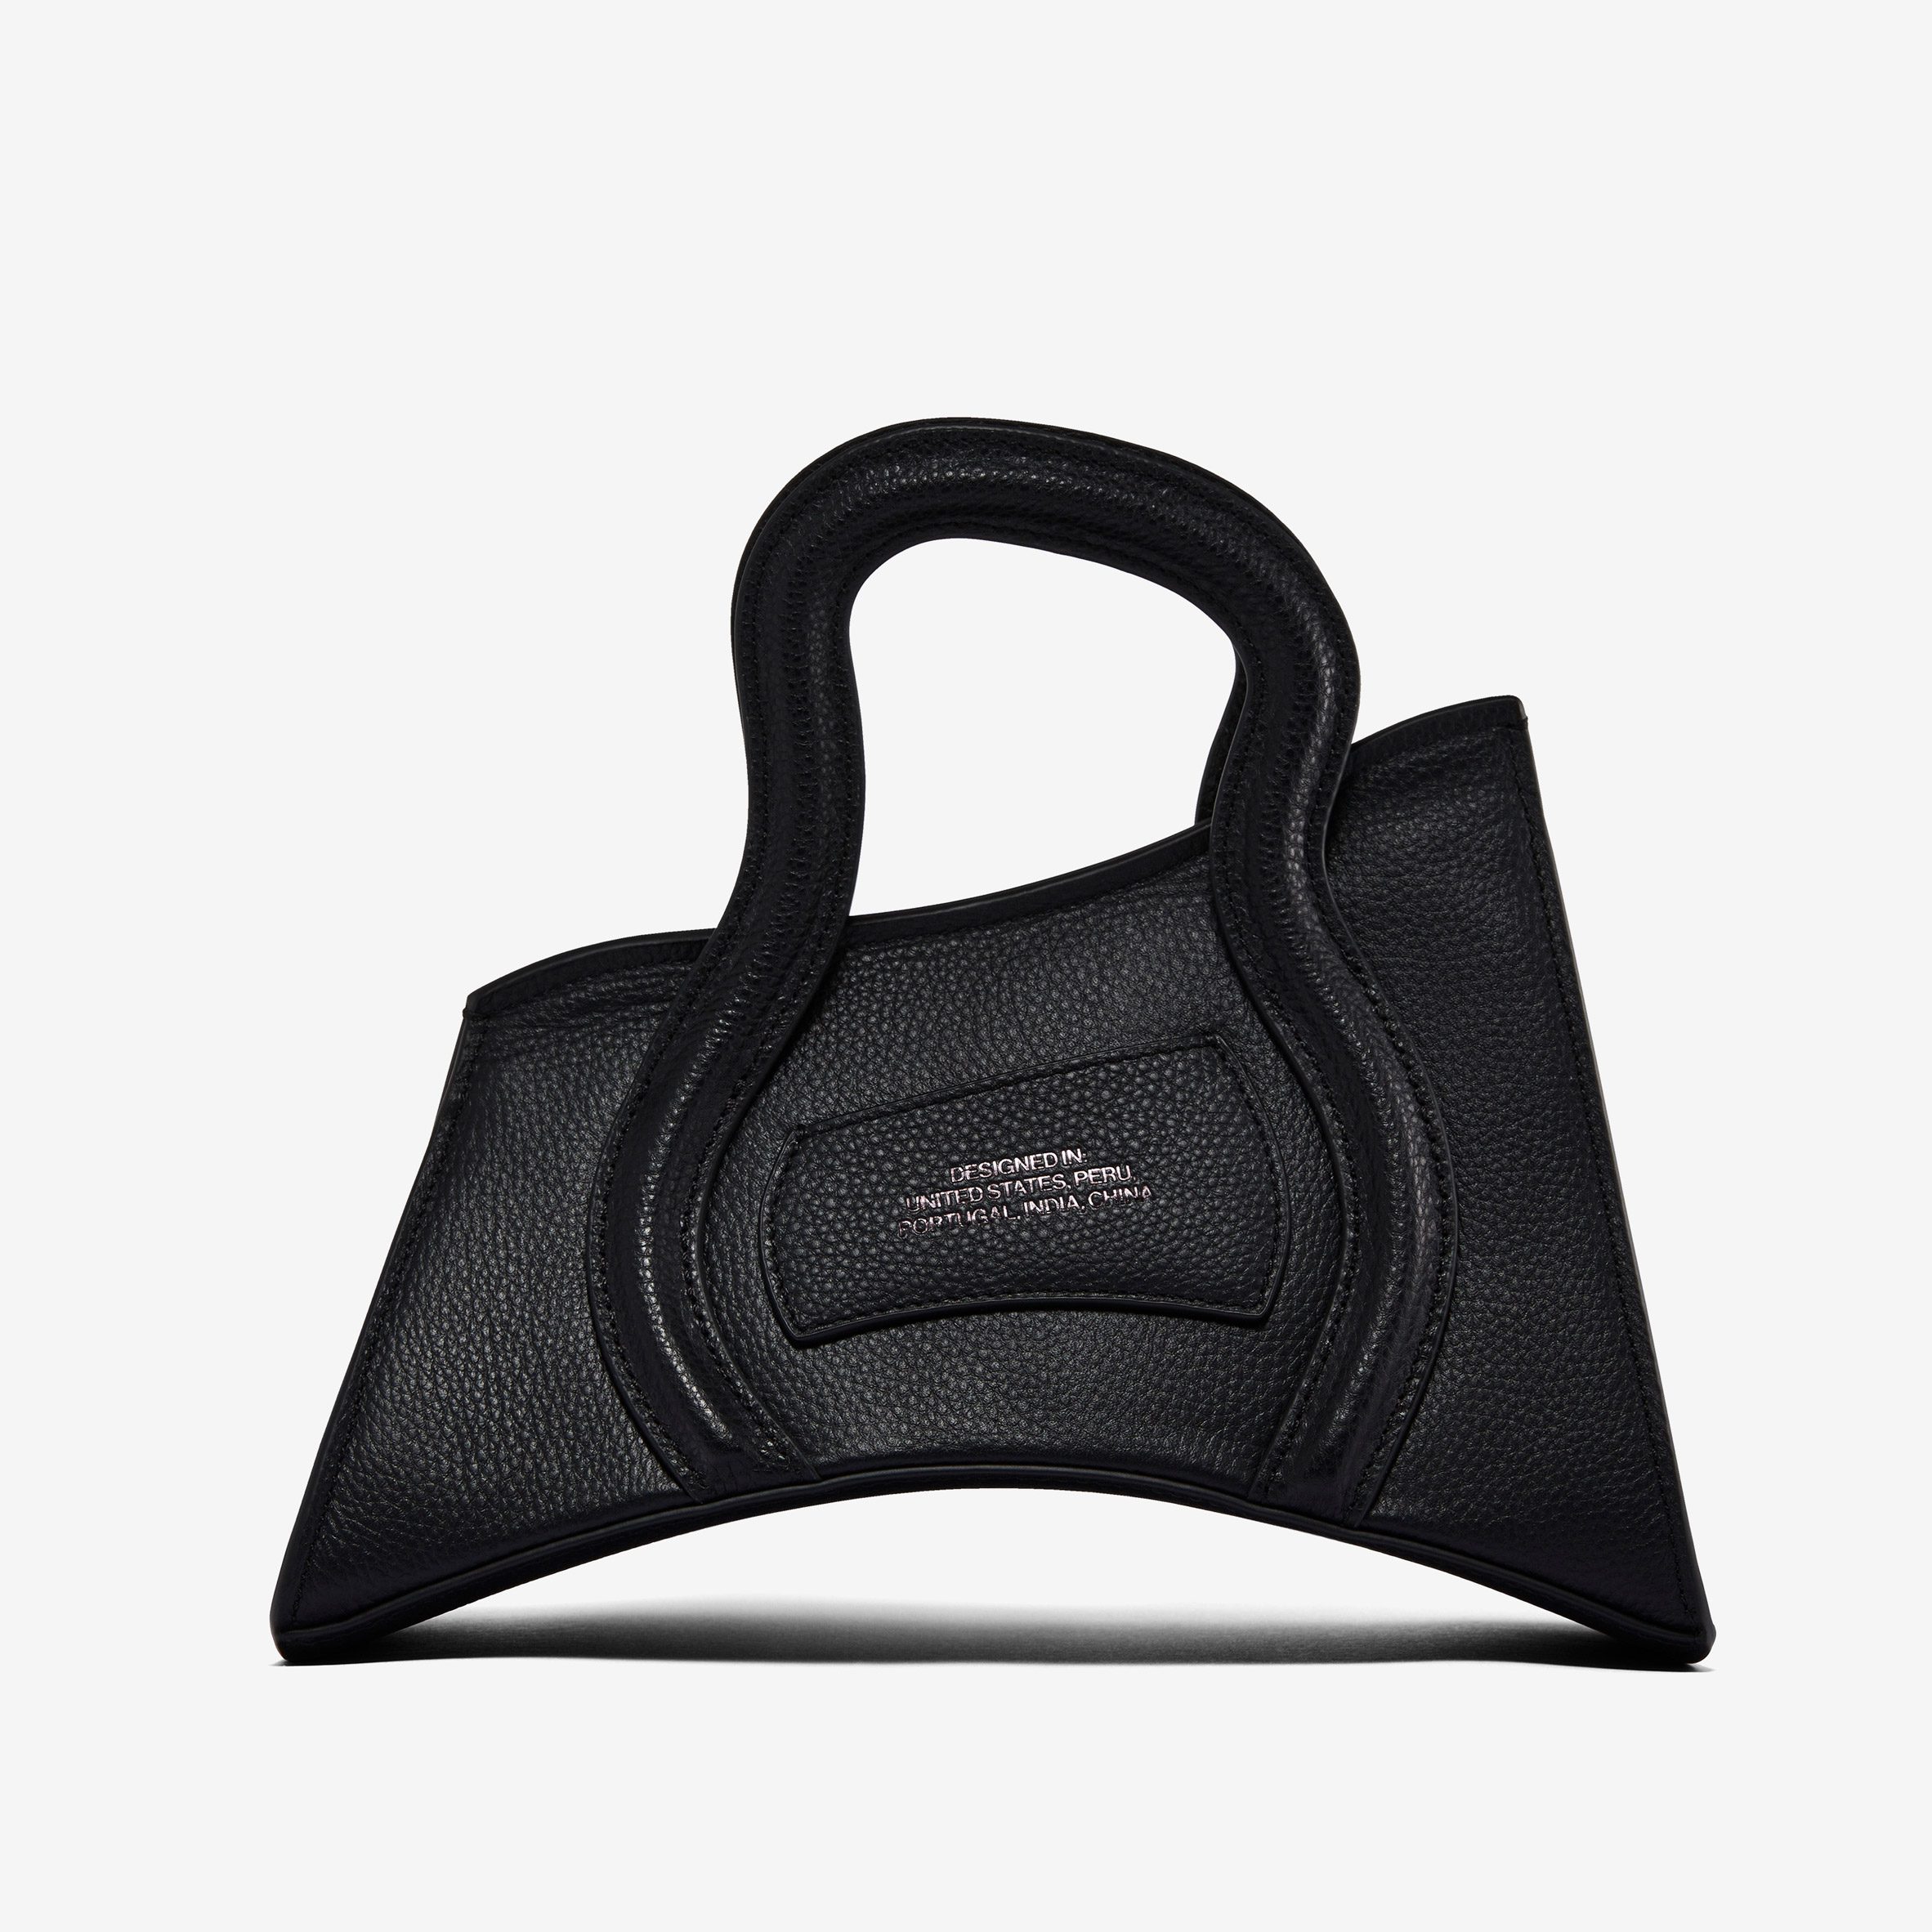 A bag with a curved bottom and pointing corners